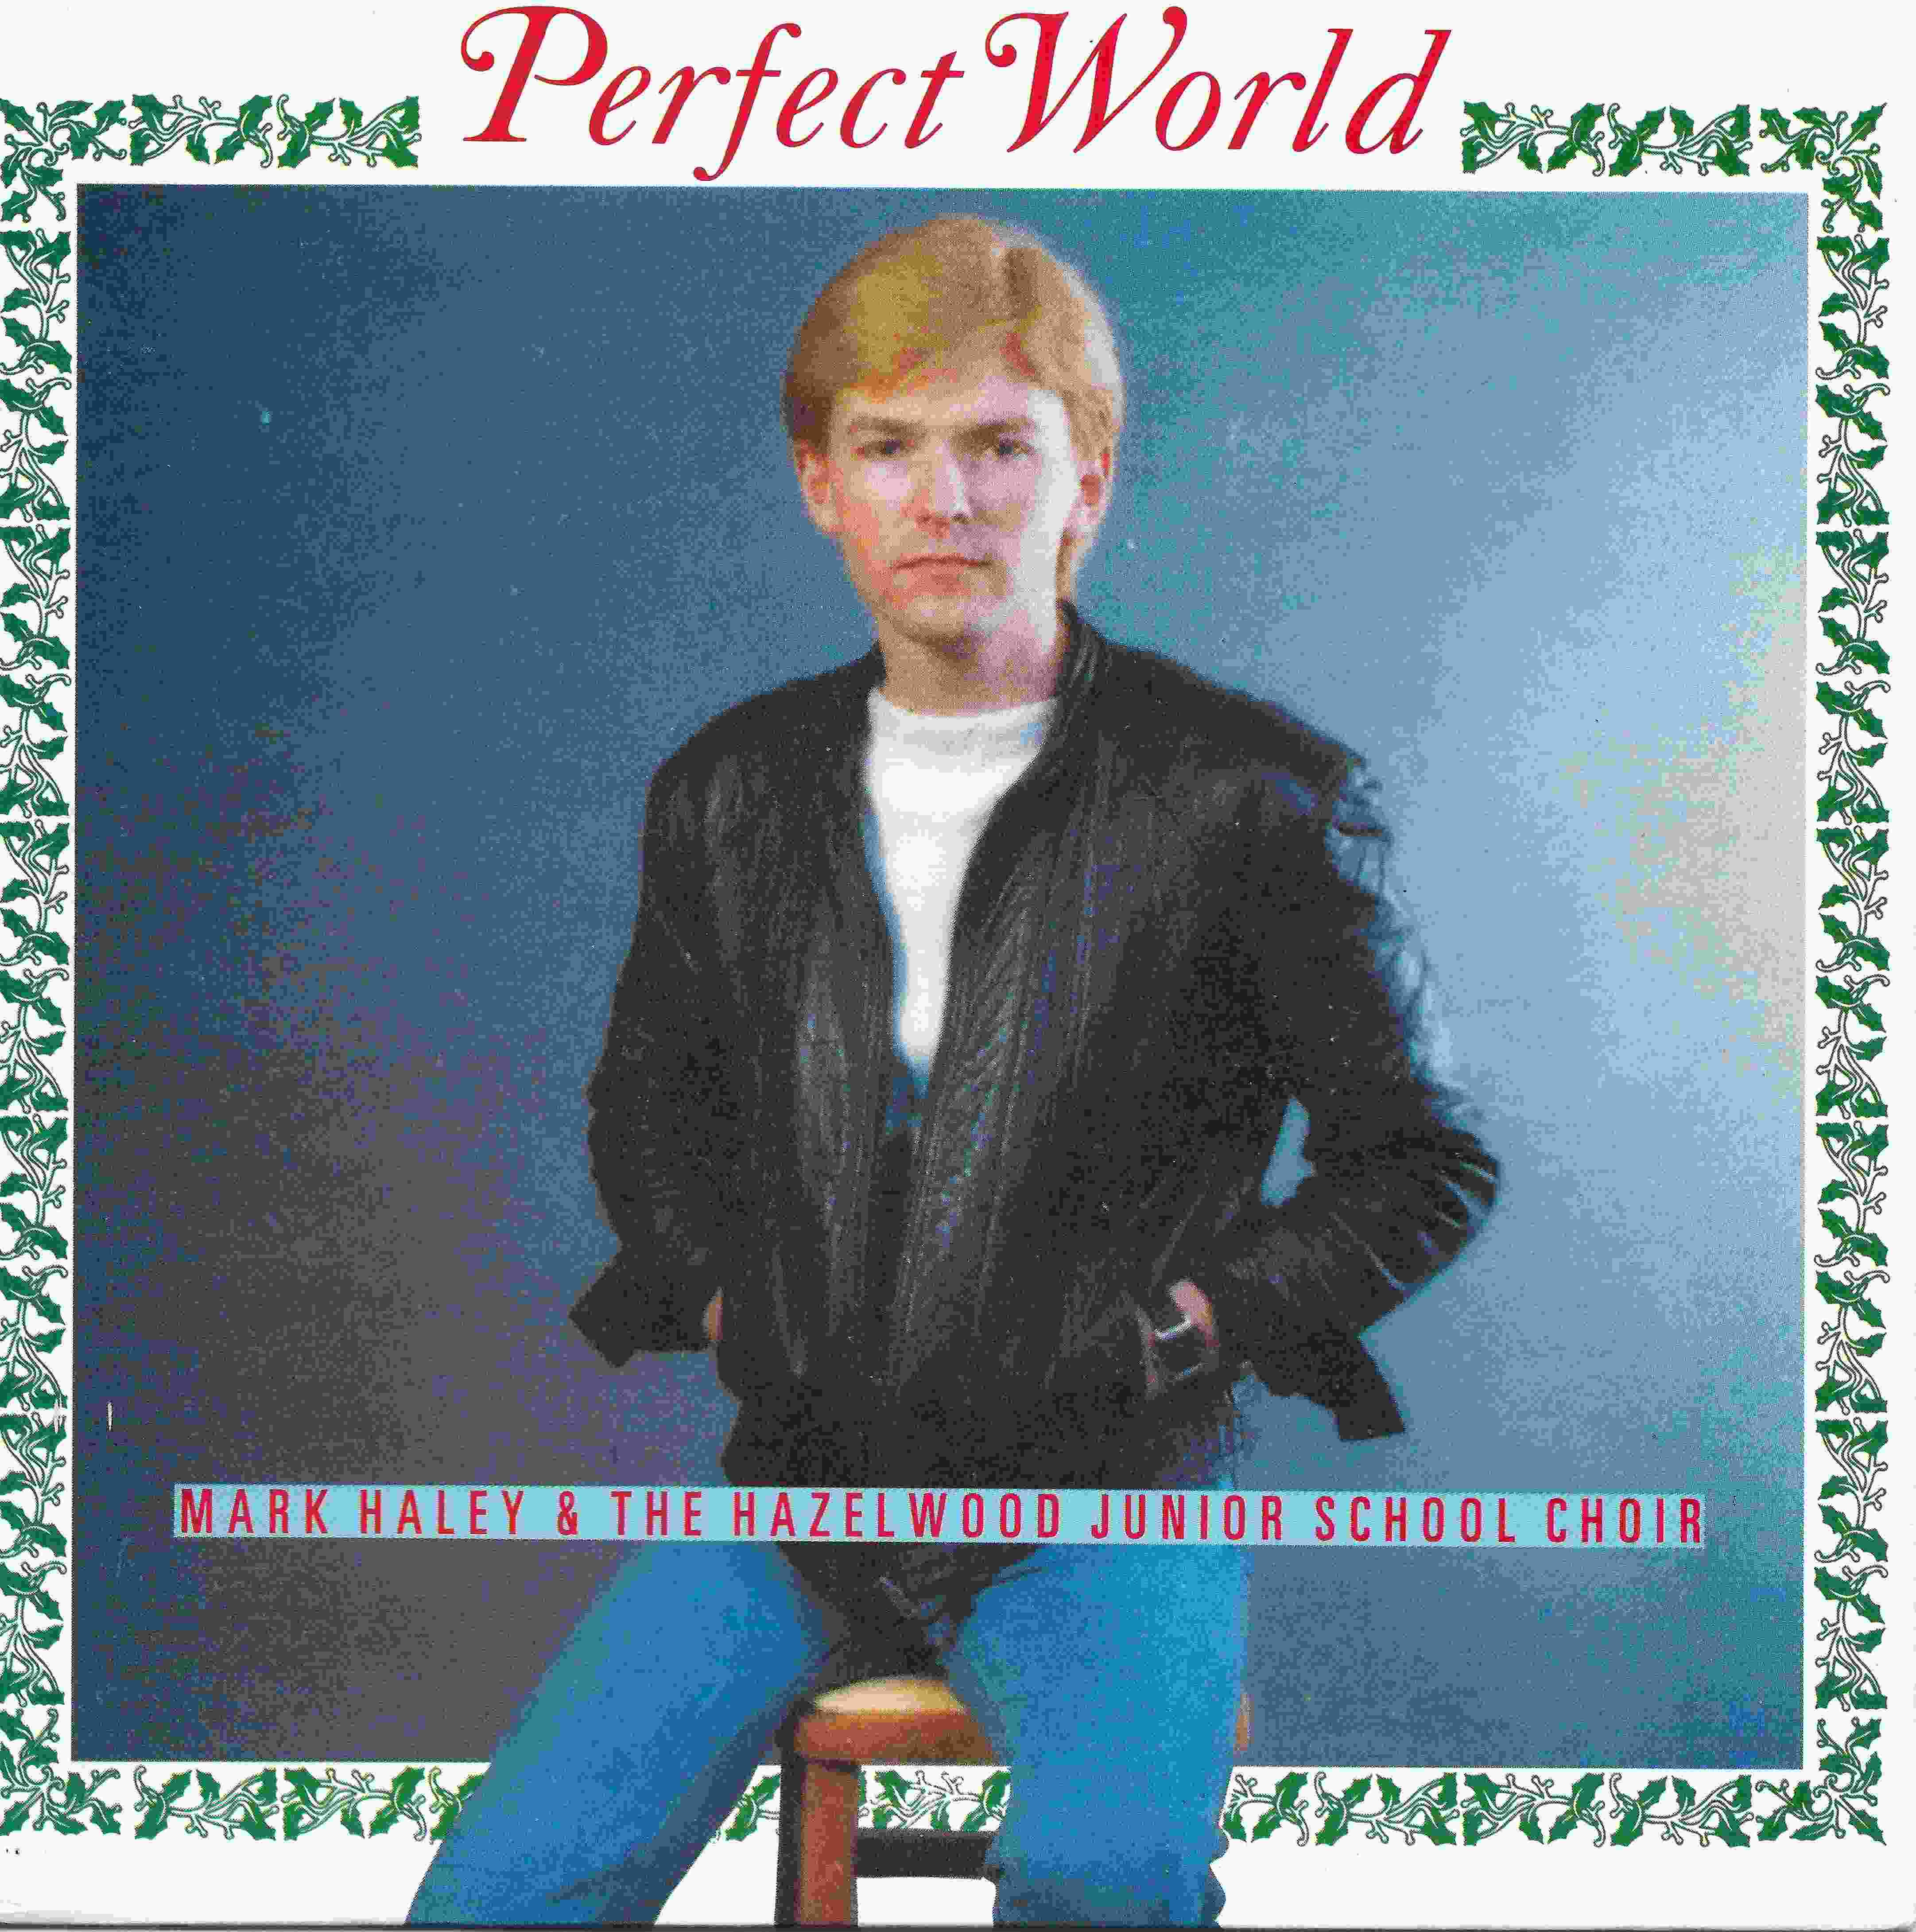 Picture of RESL 235 Perfect world by artist Mark Haley & The Hazlewood Junior School Choir from the BBC singles - Records and Tapes library